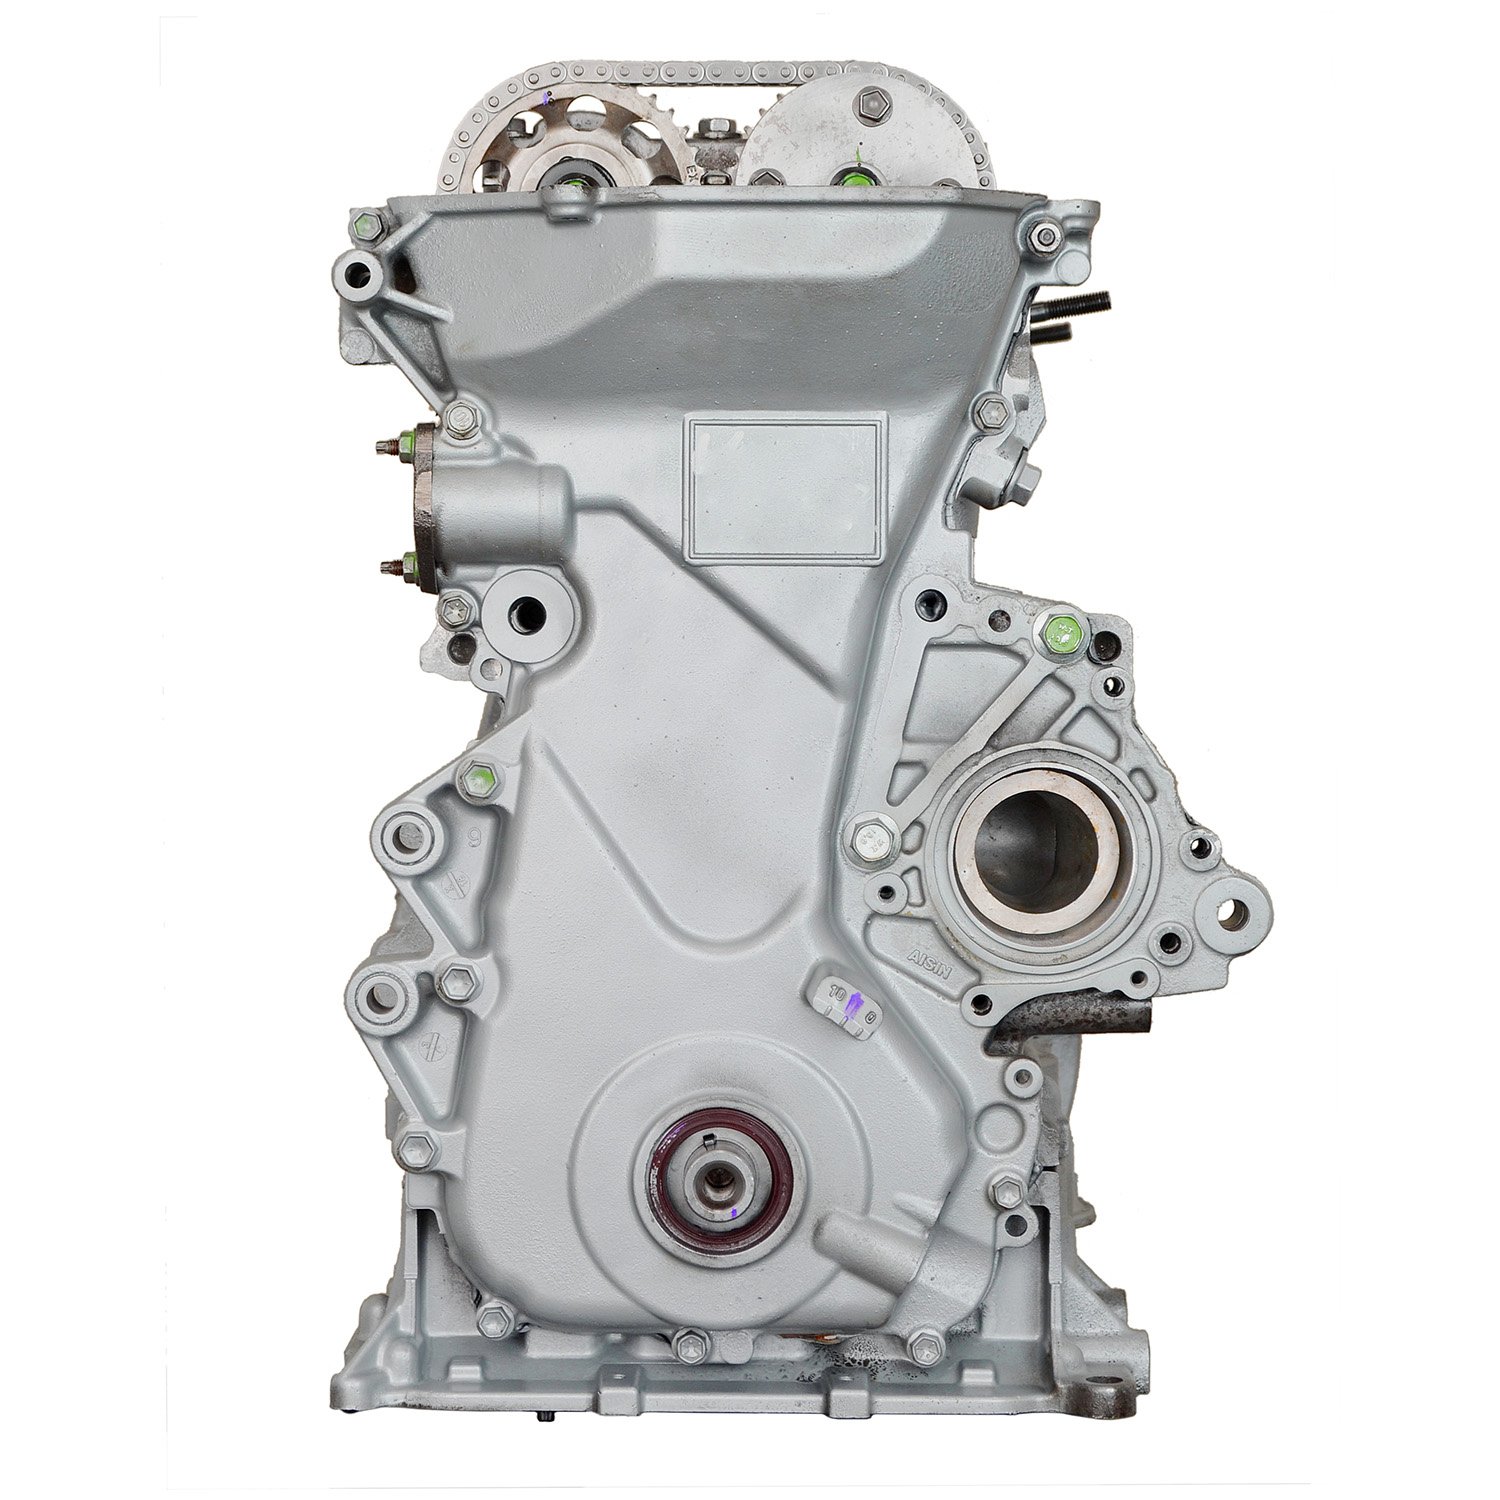 852C Remanufactured Crate Engine for 2000-2005 Toyota Celica, MR2 Spyder with 1.8L L4 1ZZFE